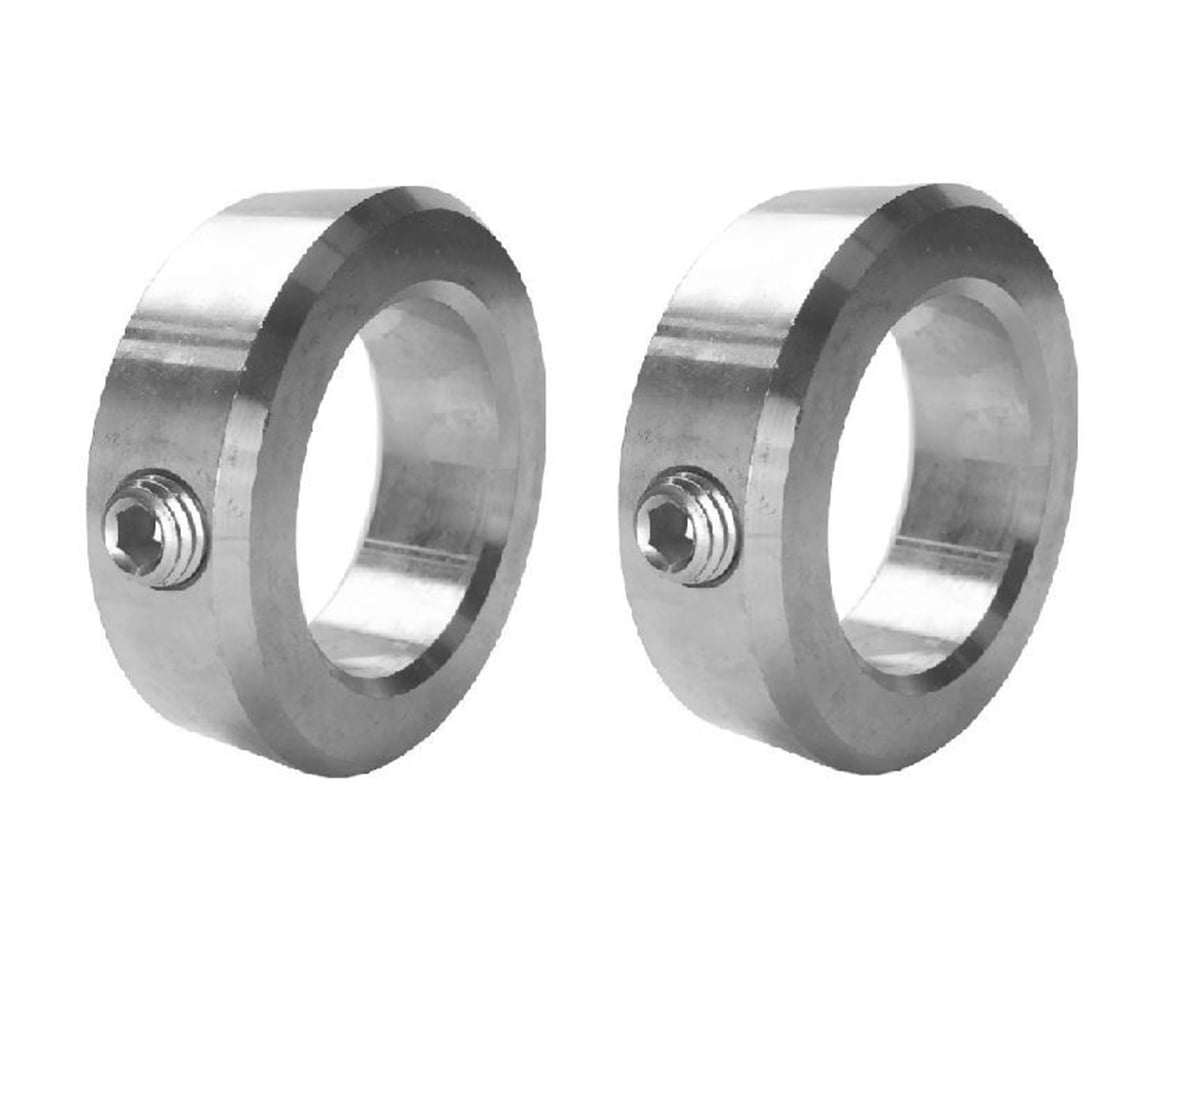 Qty. 2 1/2" Shaft Set Collar Solid Zinc Plated Steel with Set Screw SC50 